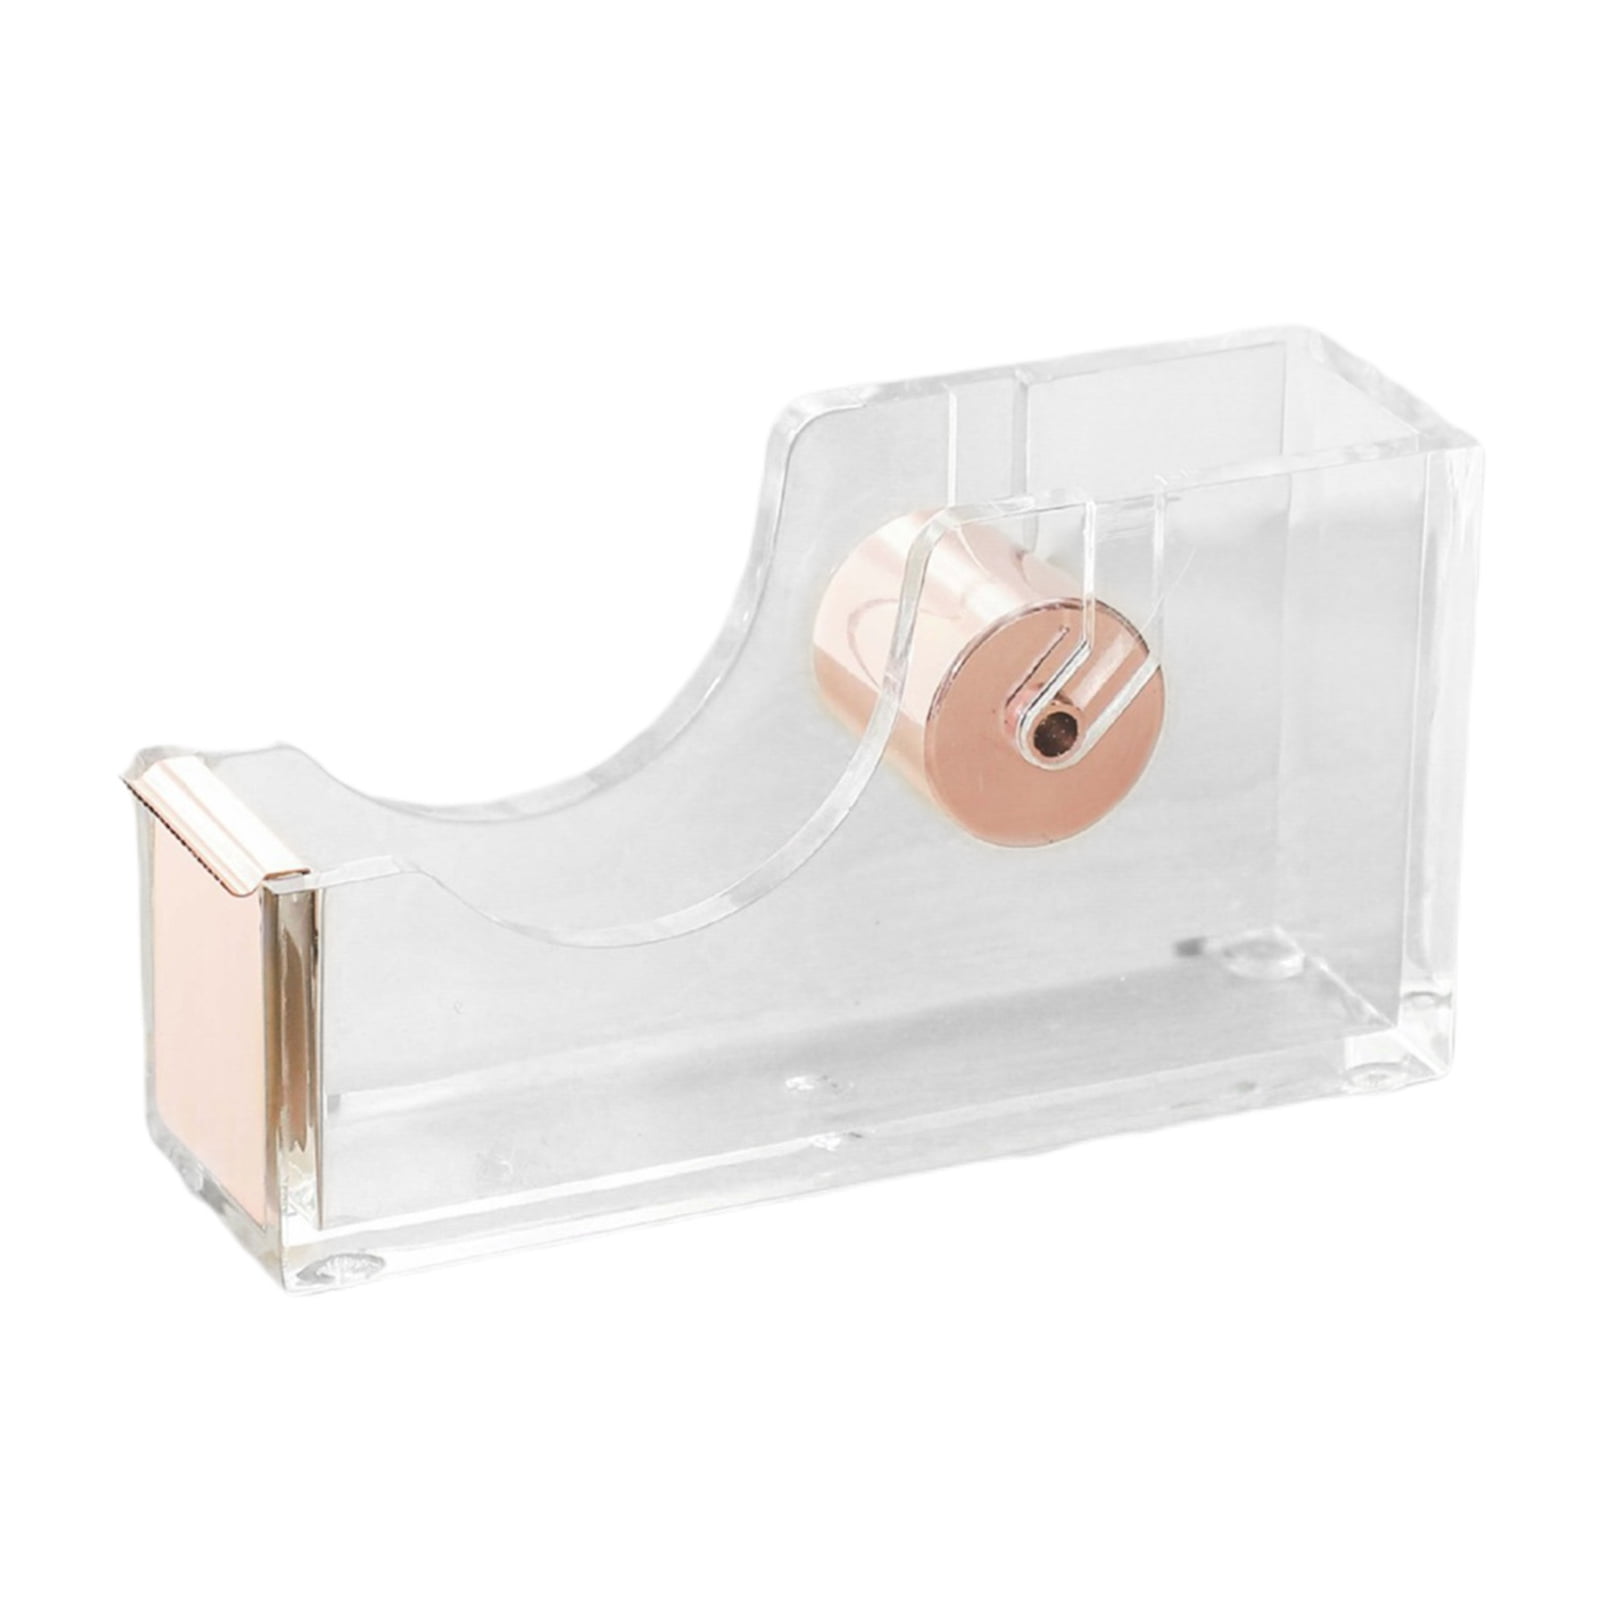 Adhesive tape dispenser Acrylic stationery available Adhesive organization for Rose Gold